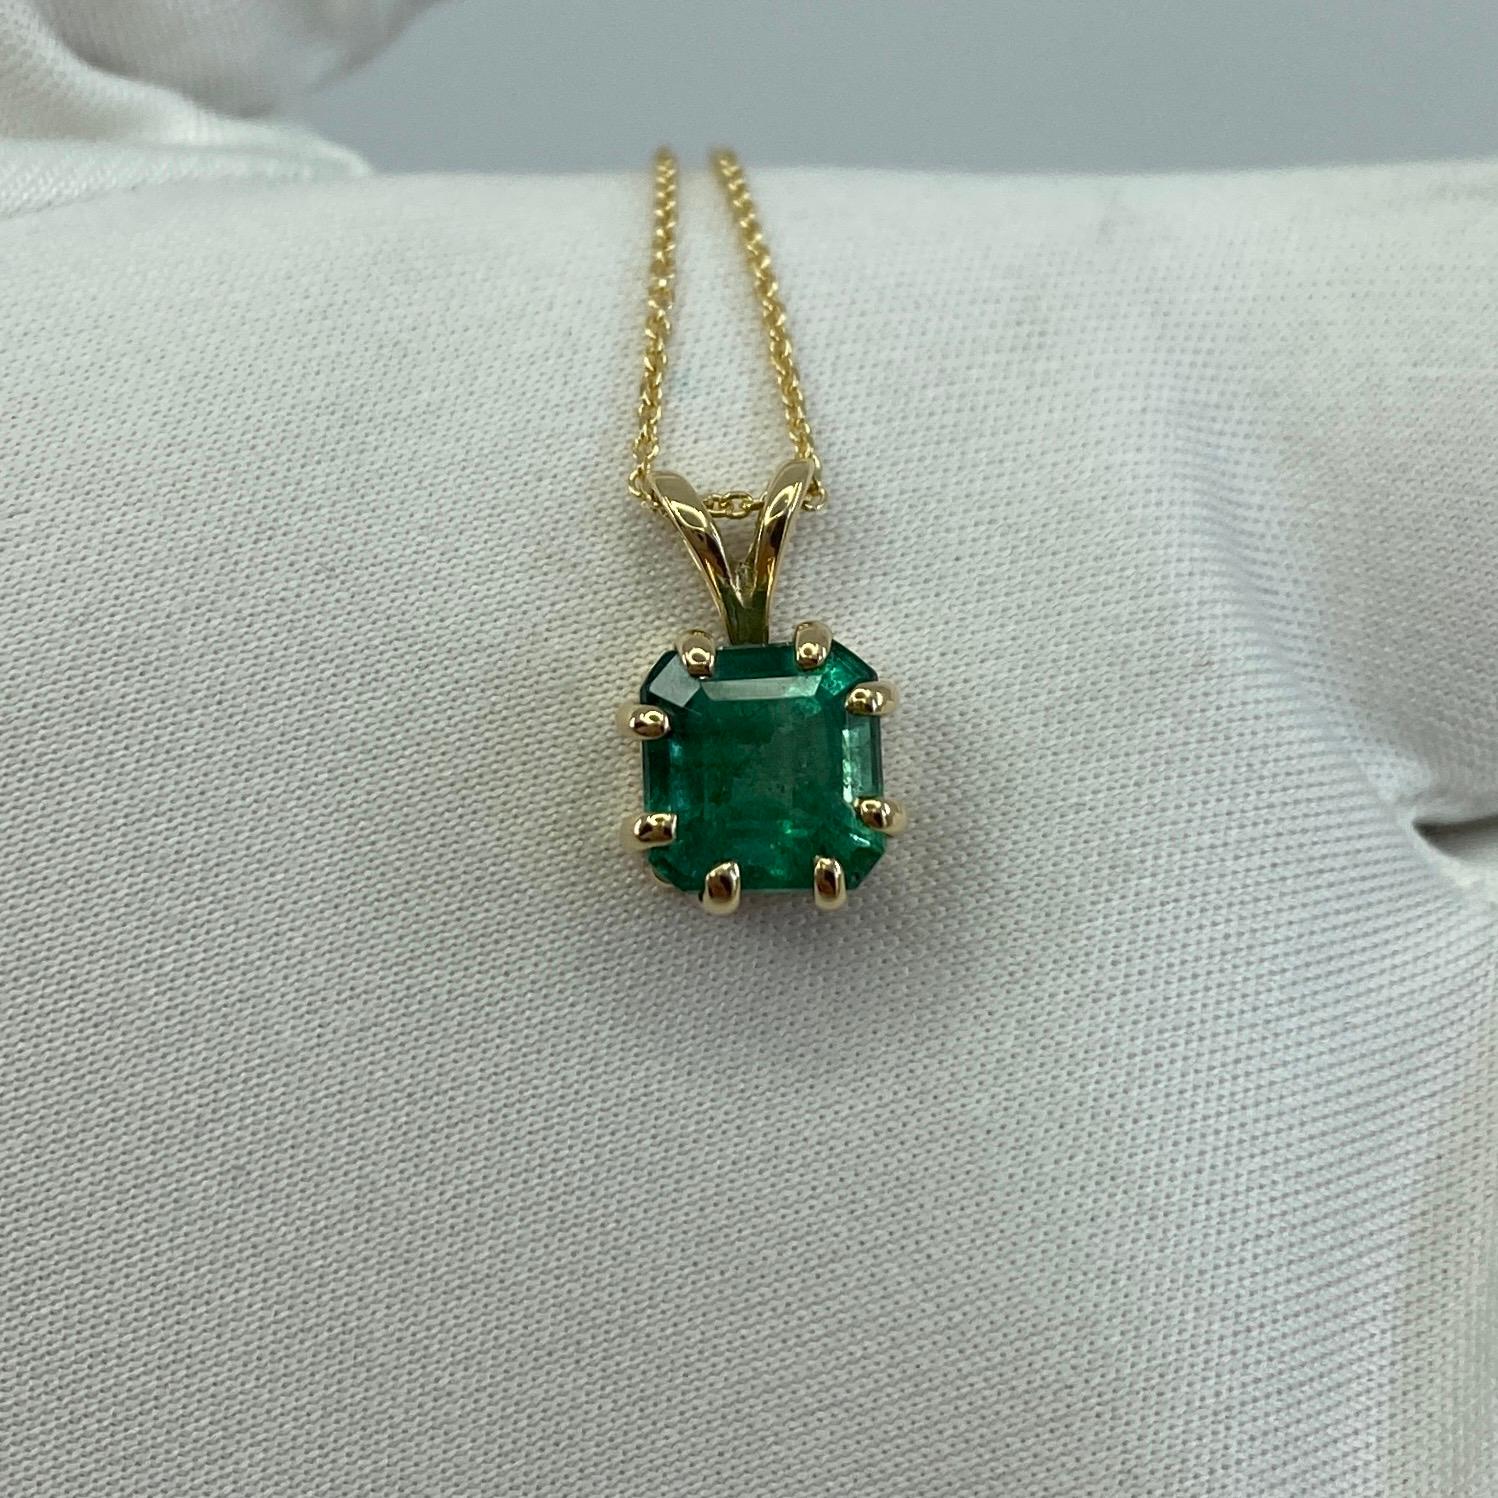 Deep Green Emerald 14k Yellow Gold Pendant Necklace.

1.20 Carat emerald with a fine deep green colour and good clarity.  Some small natural inclusions visible (as expected with emeralds) but still a clean stone. 

Also has an excellent square